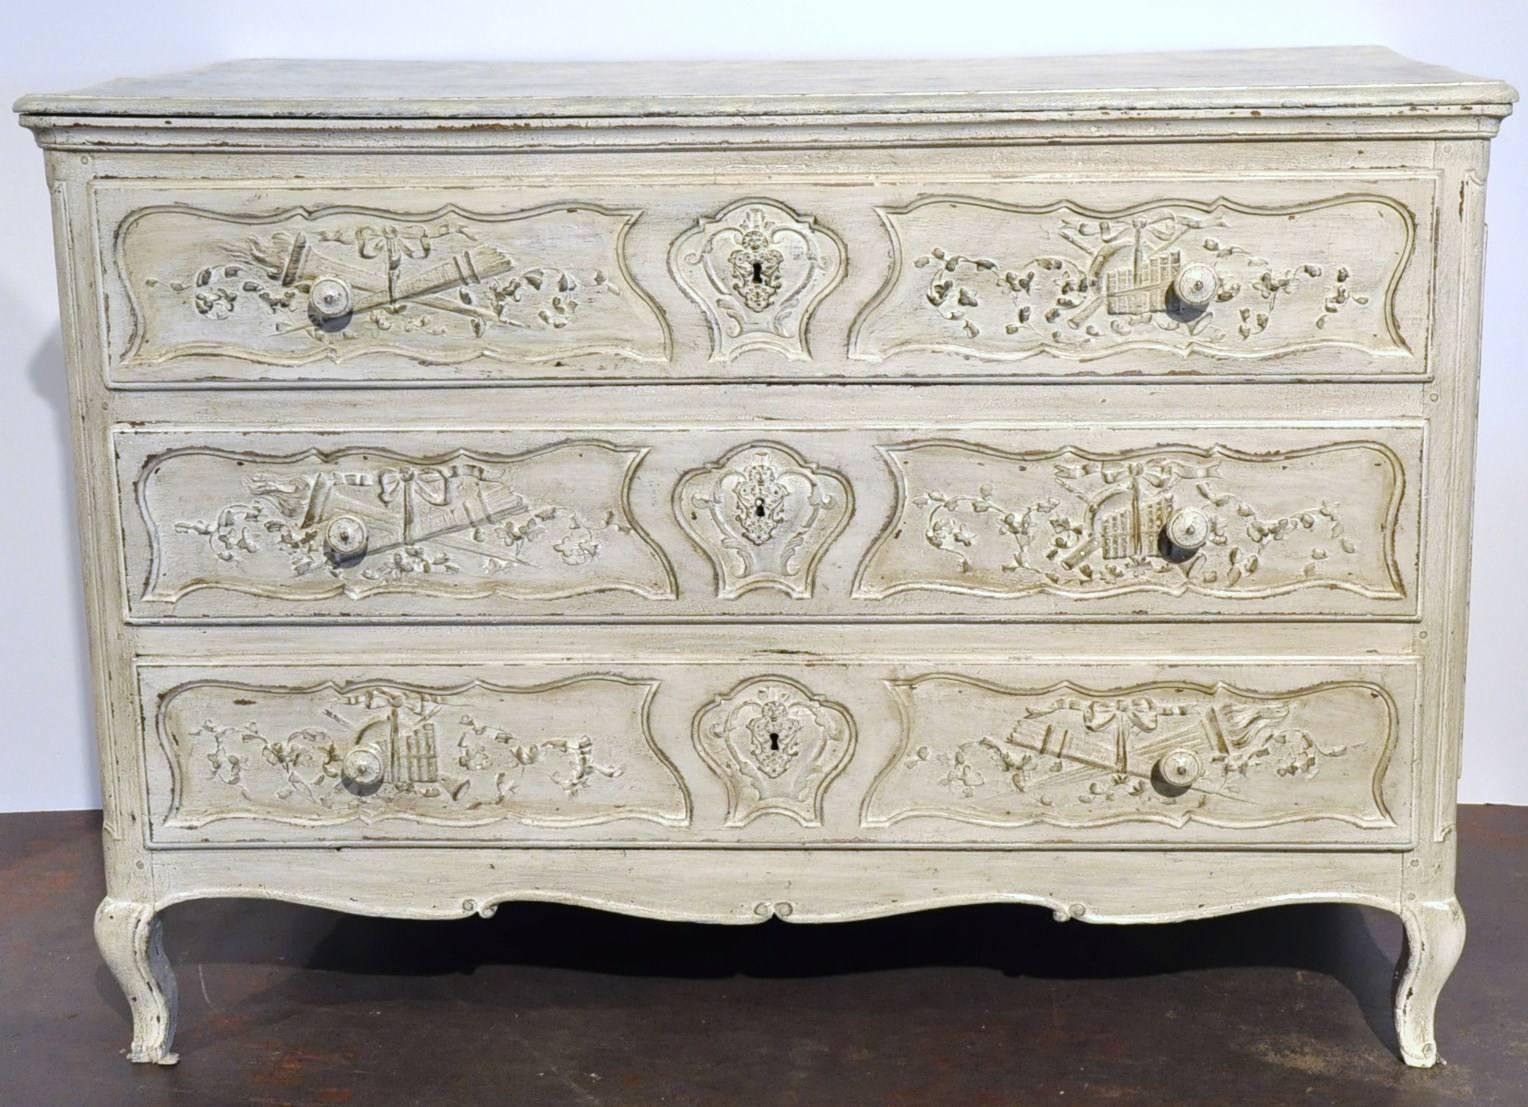 Decorate an entry or a bedroom with this elegant antique chest of drawers. Crafted in northern France, circa 1780, the commode features three carved drawers across the front embellished with iron pulls, a scalloped apron over the scroll feet and